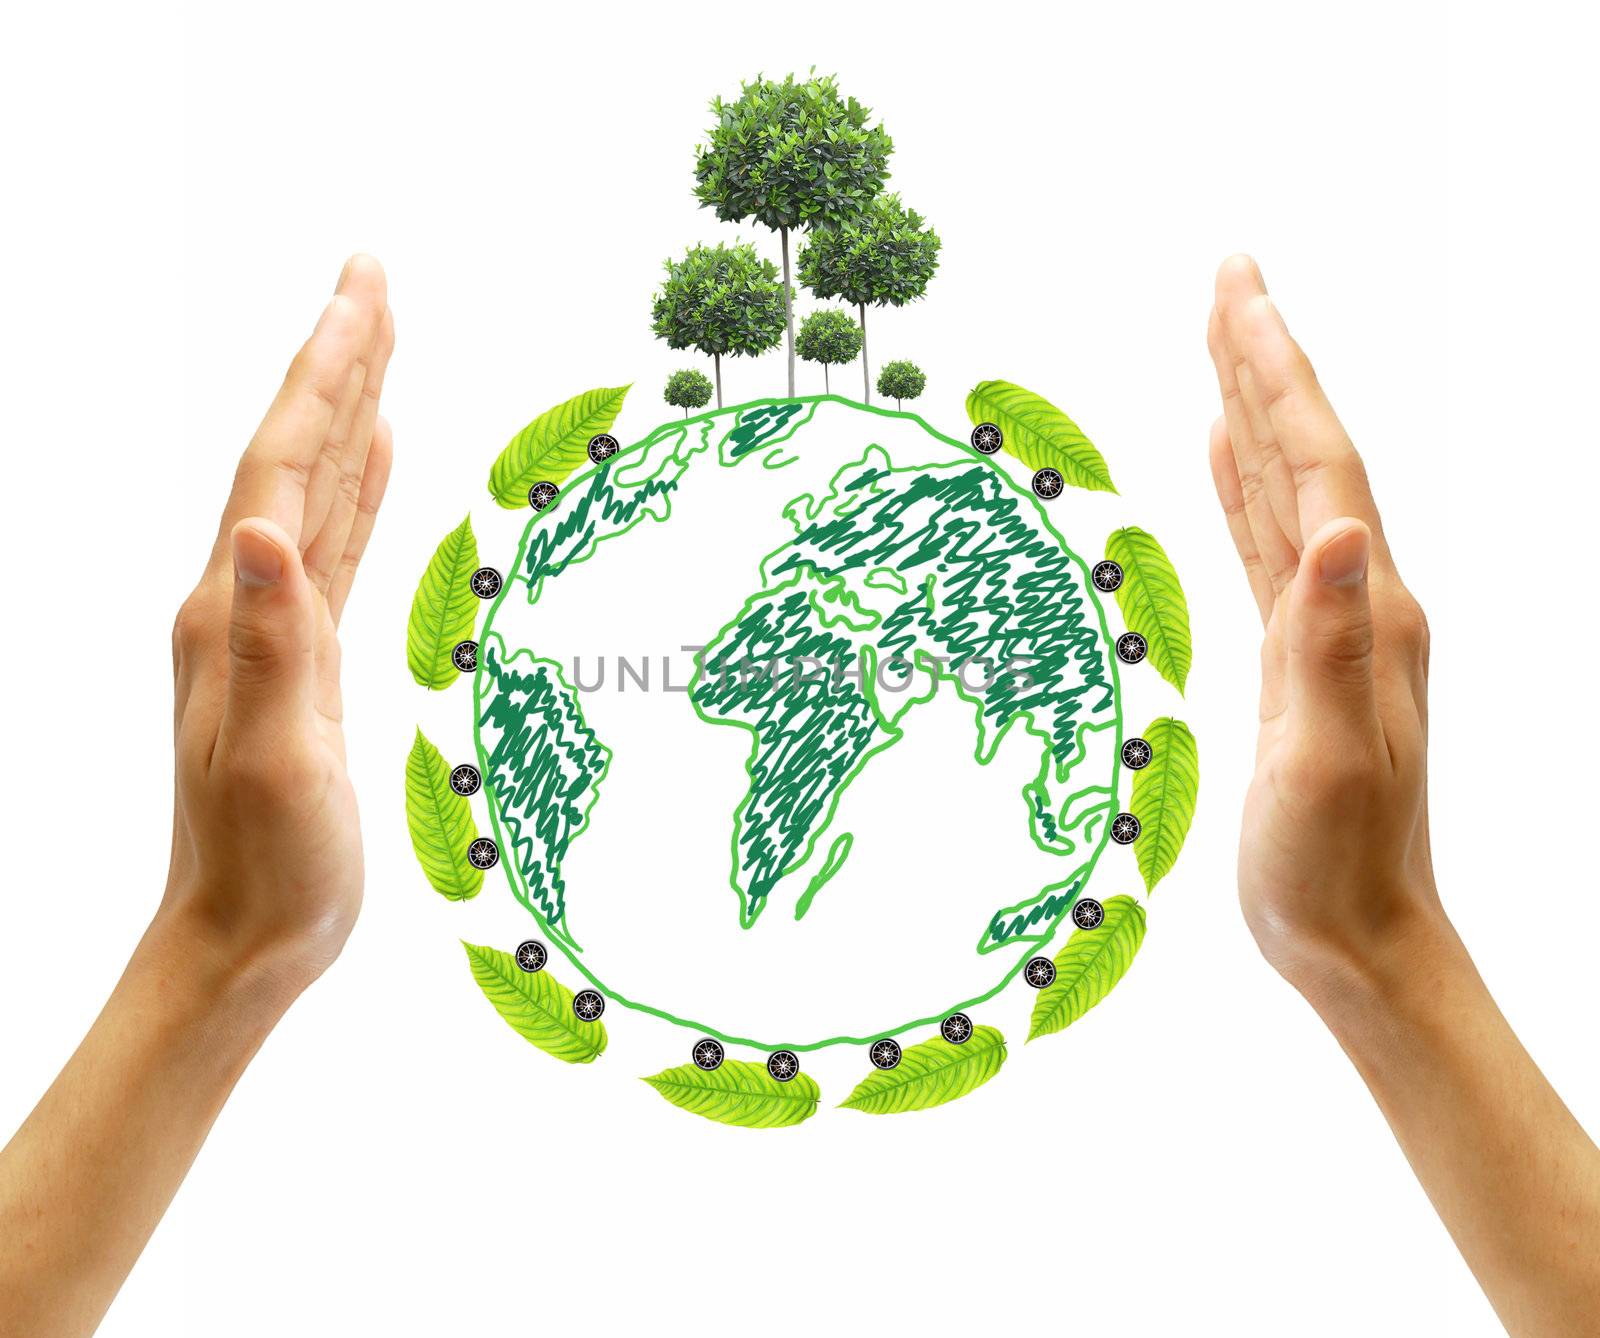 save the planet image composition with the earth